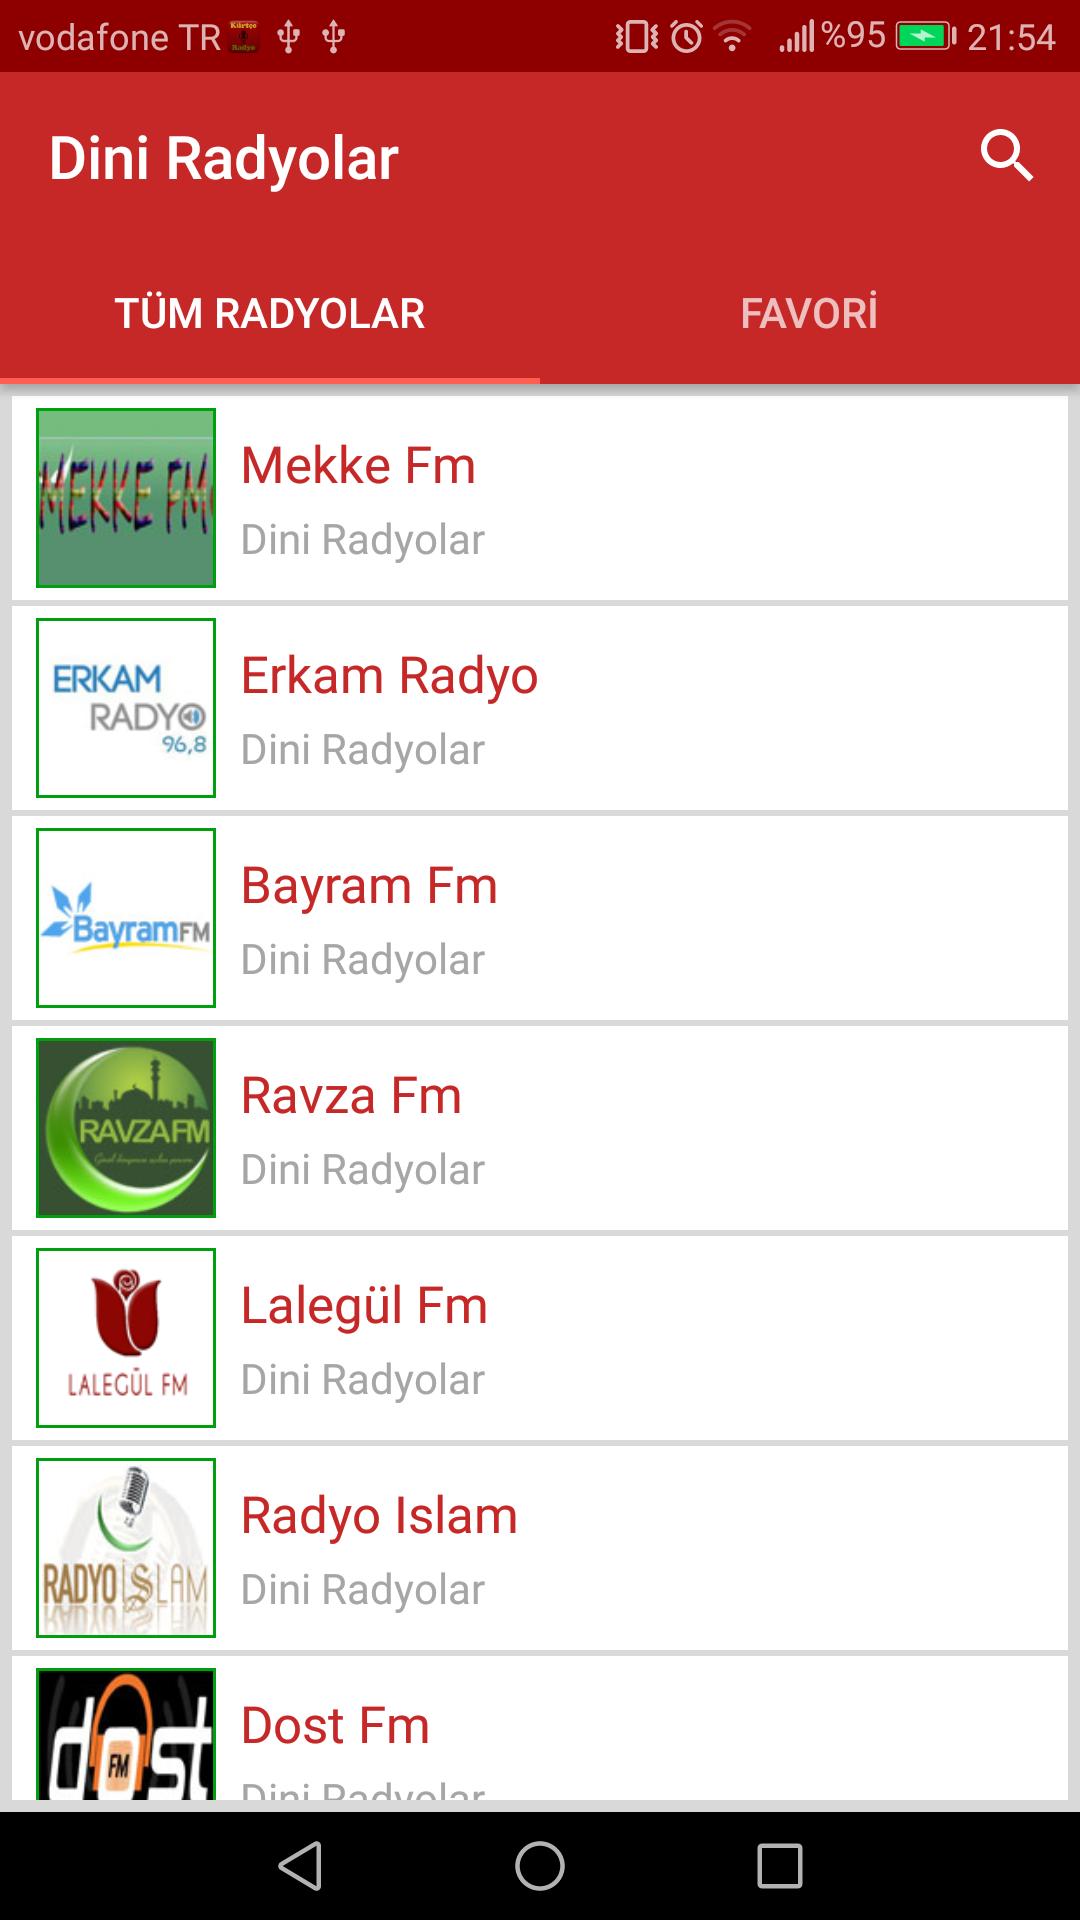 Dini Radyolar for Android - APK Download